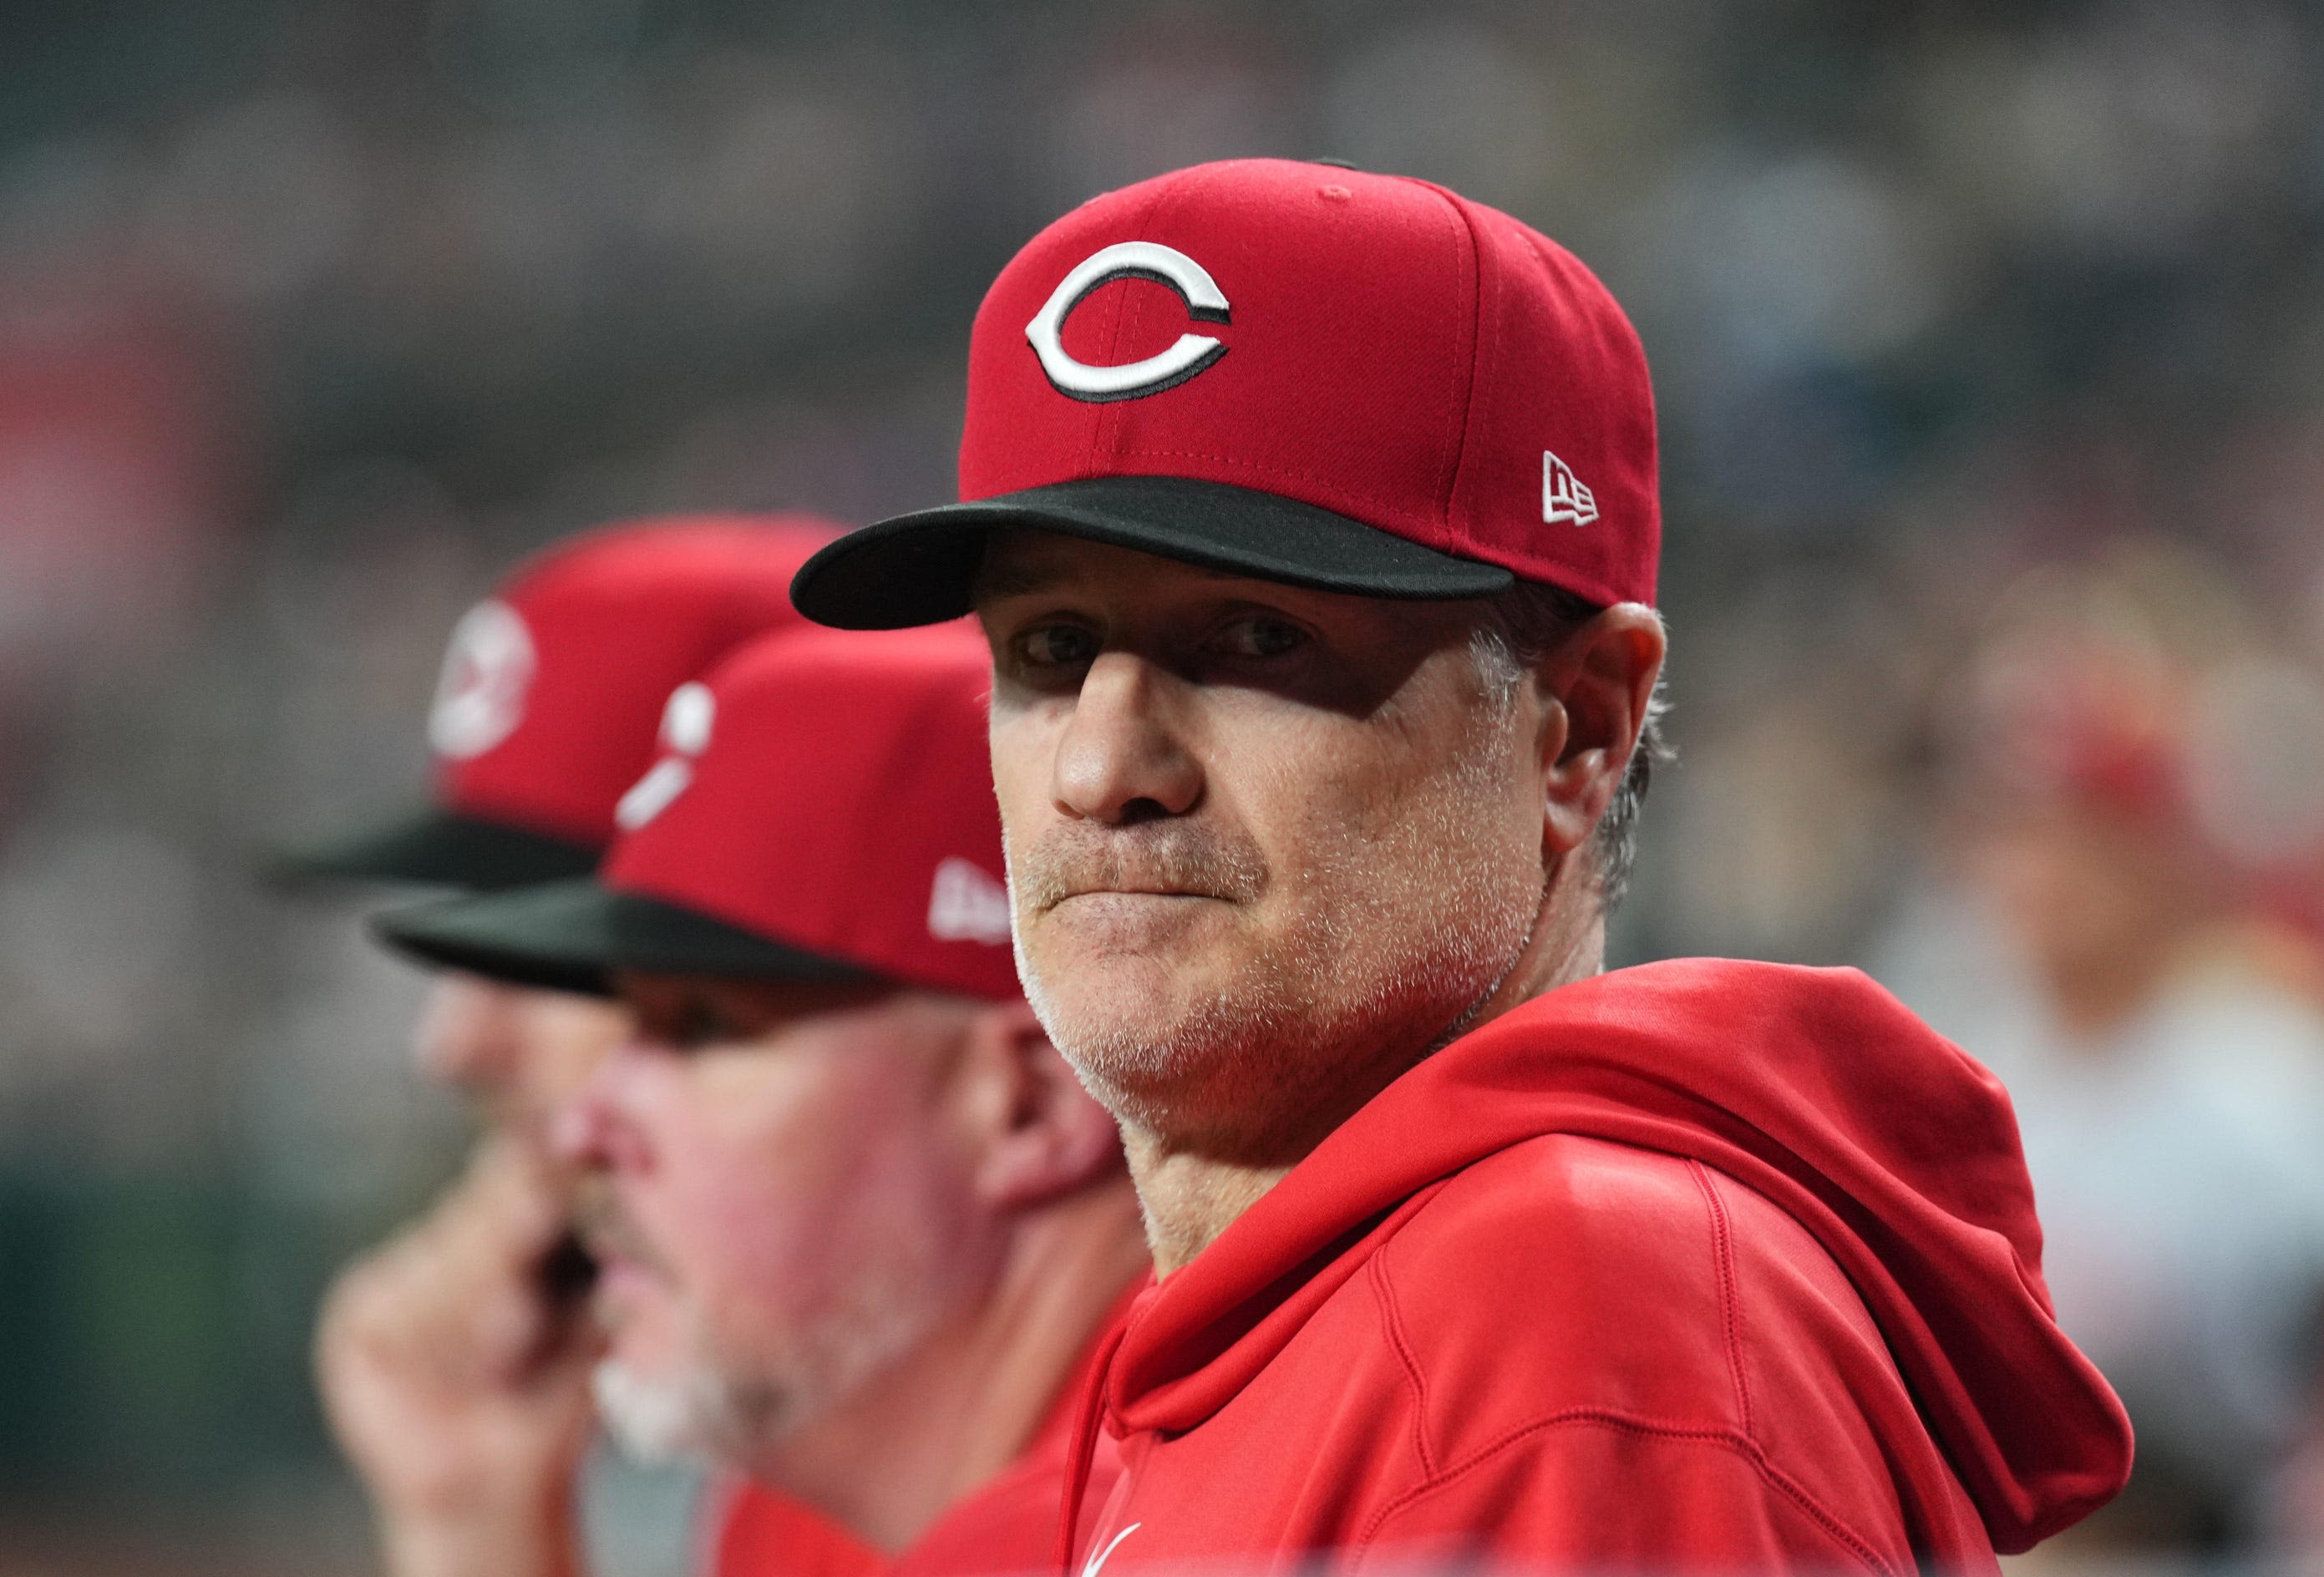 Cincinnati Reds manager David Bell to join NL coaching staff for All-Star game